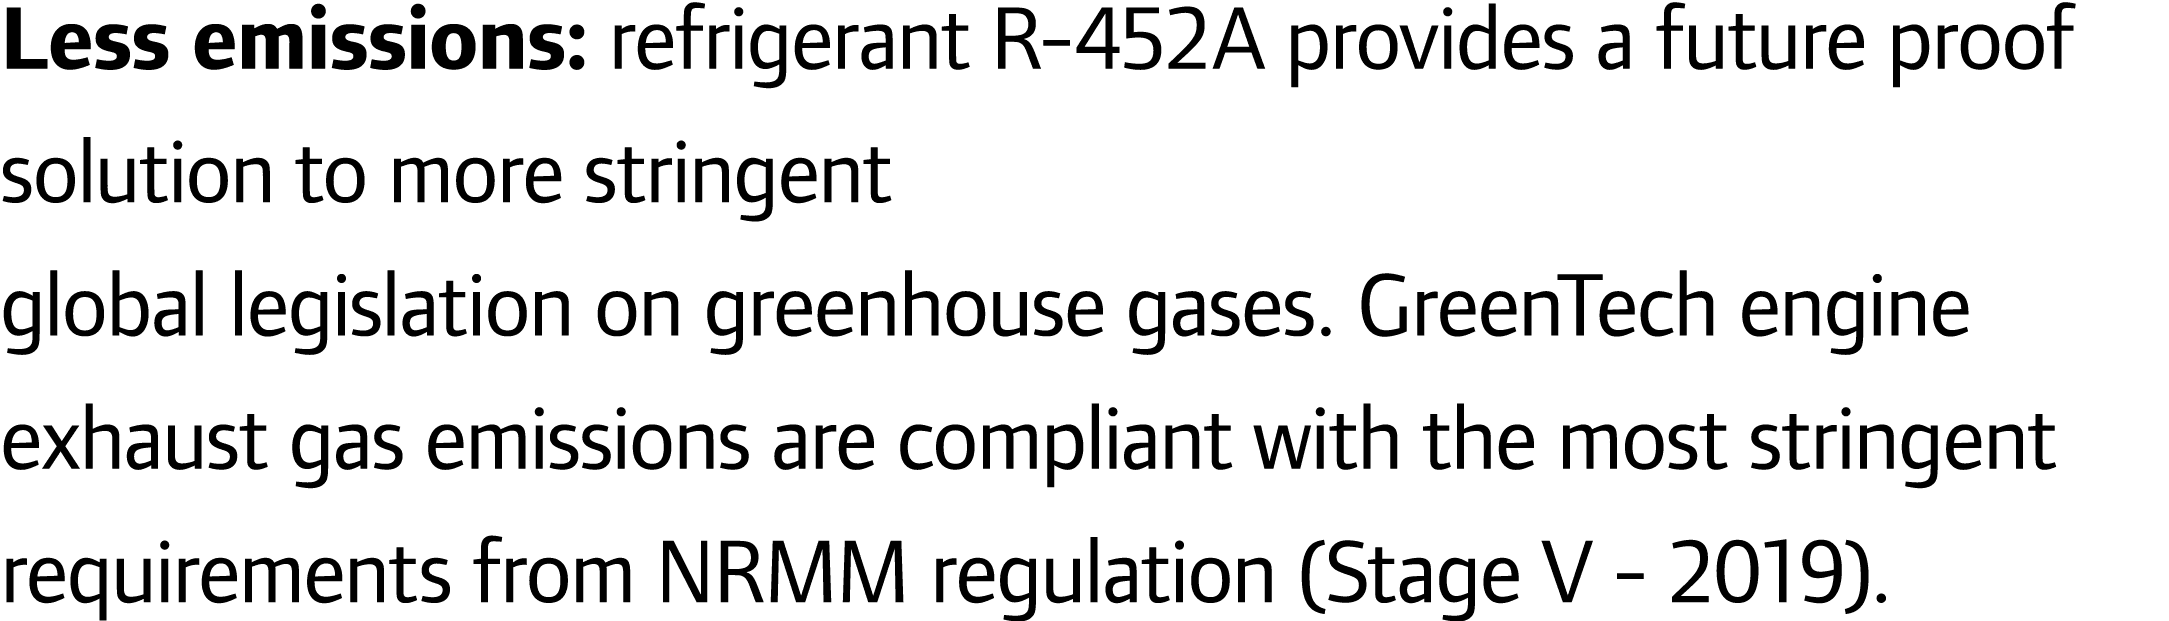 Less emissions: refrigerant R-452A provides a future proof solution to more stringent global legislation on greenhous...